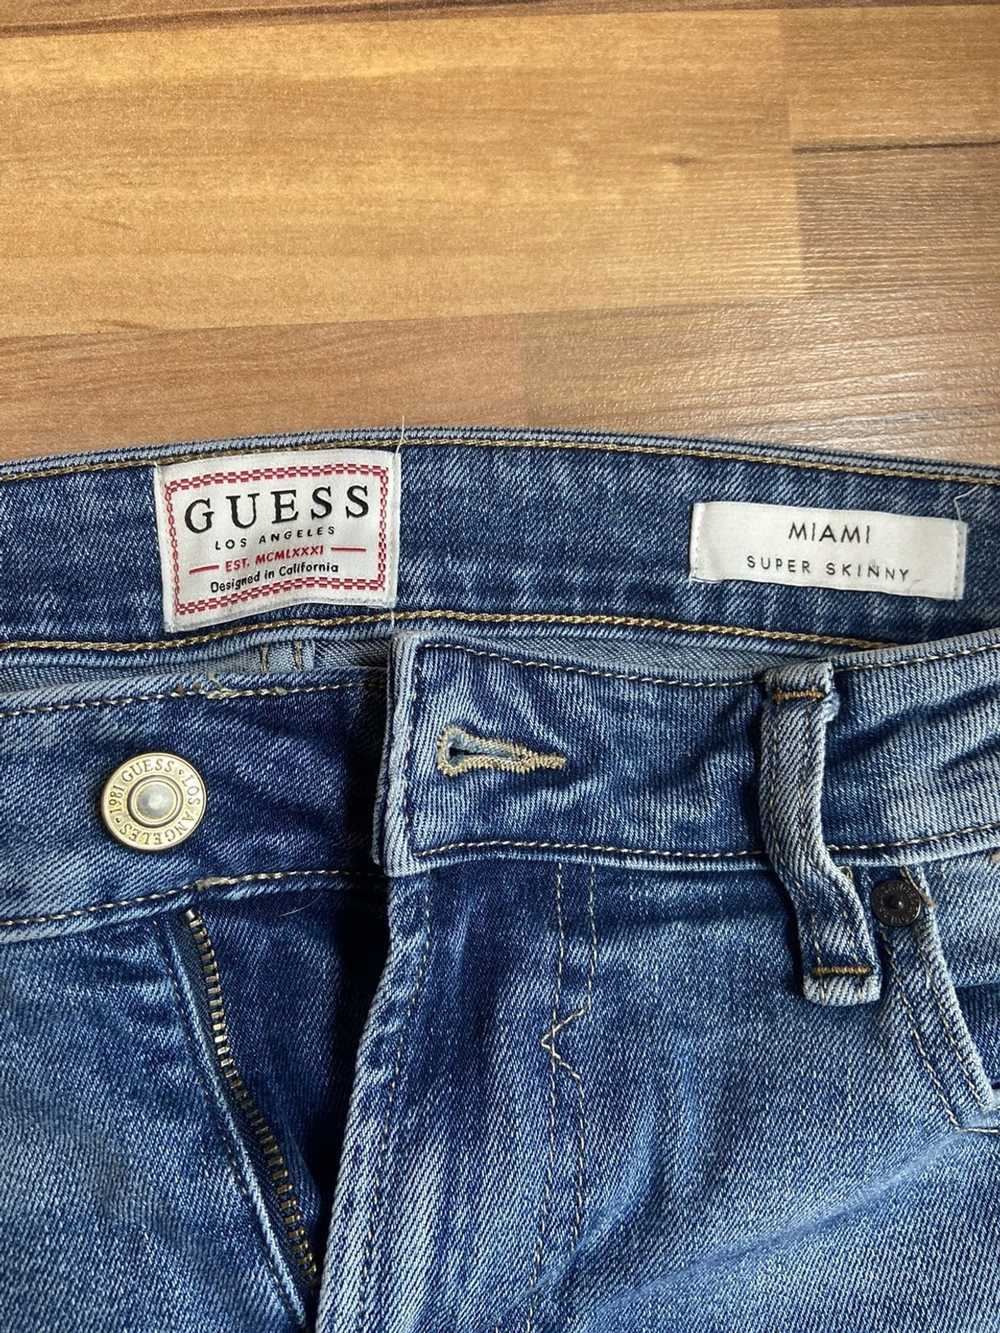 Guess Guess Jeans - image 2